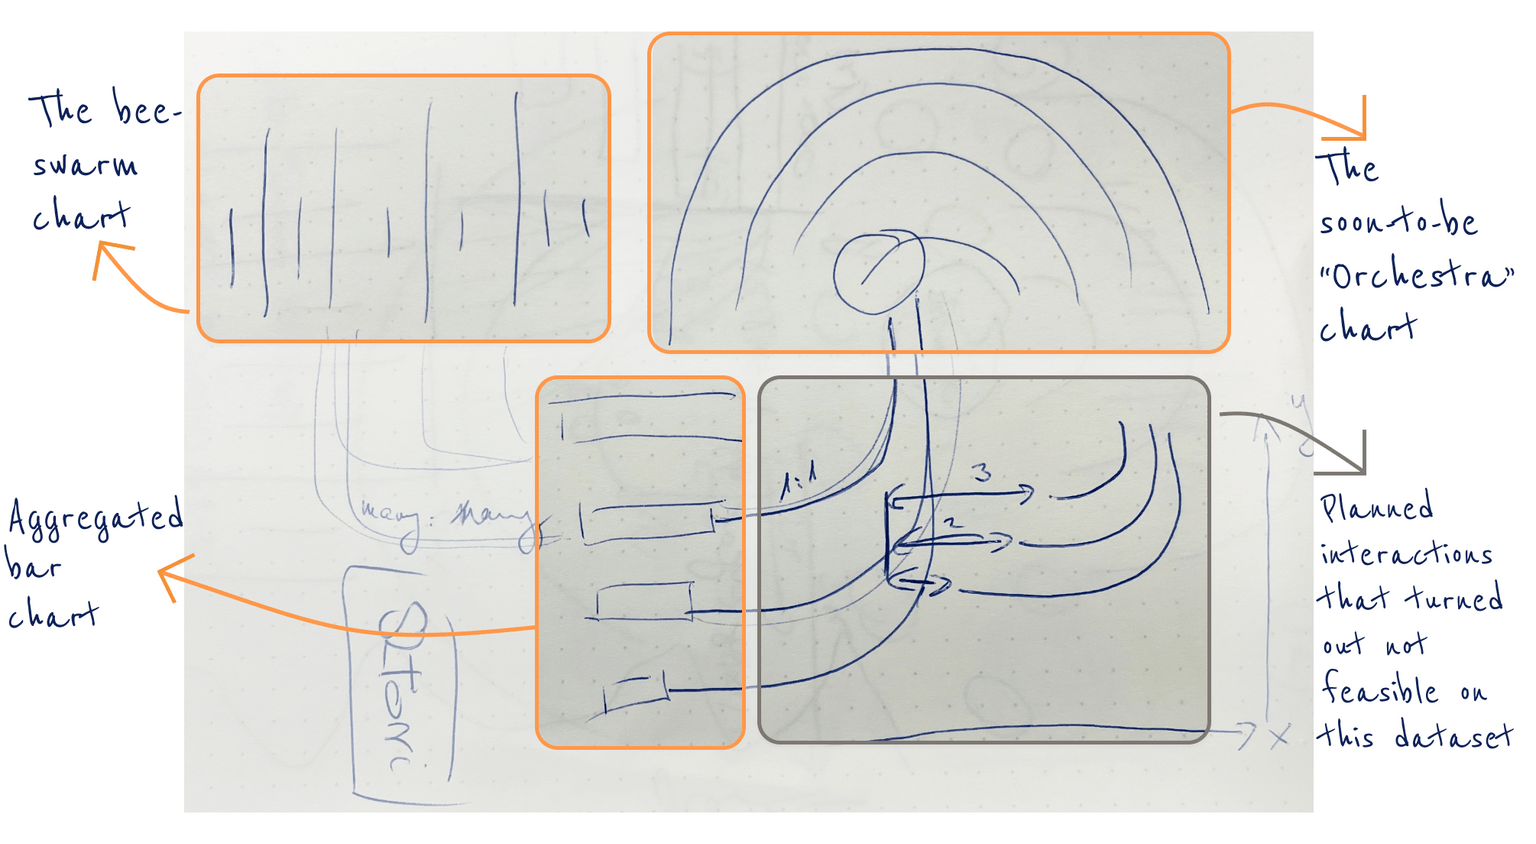 First sketch drawn by hand, containing the main visual elements